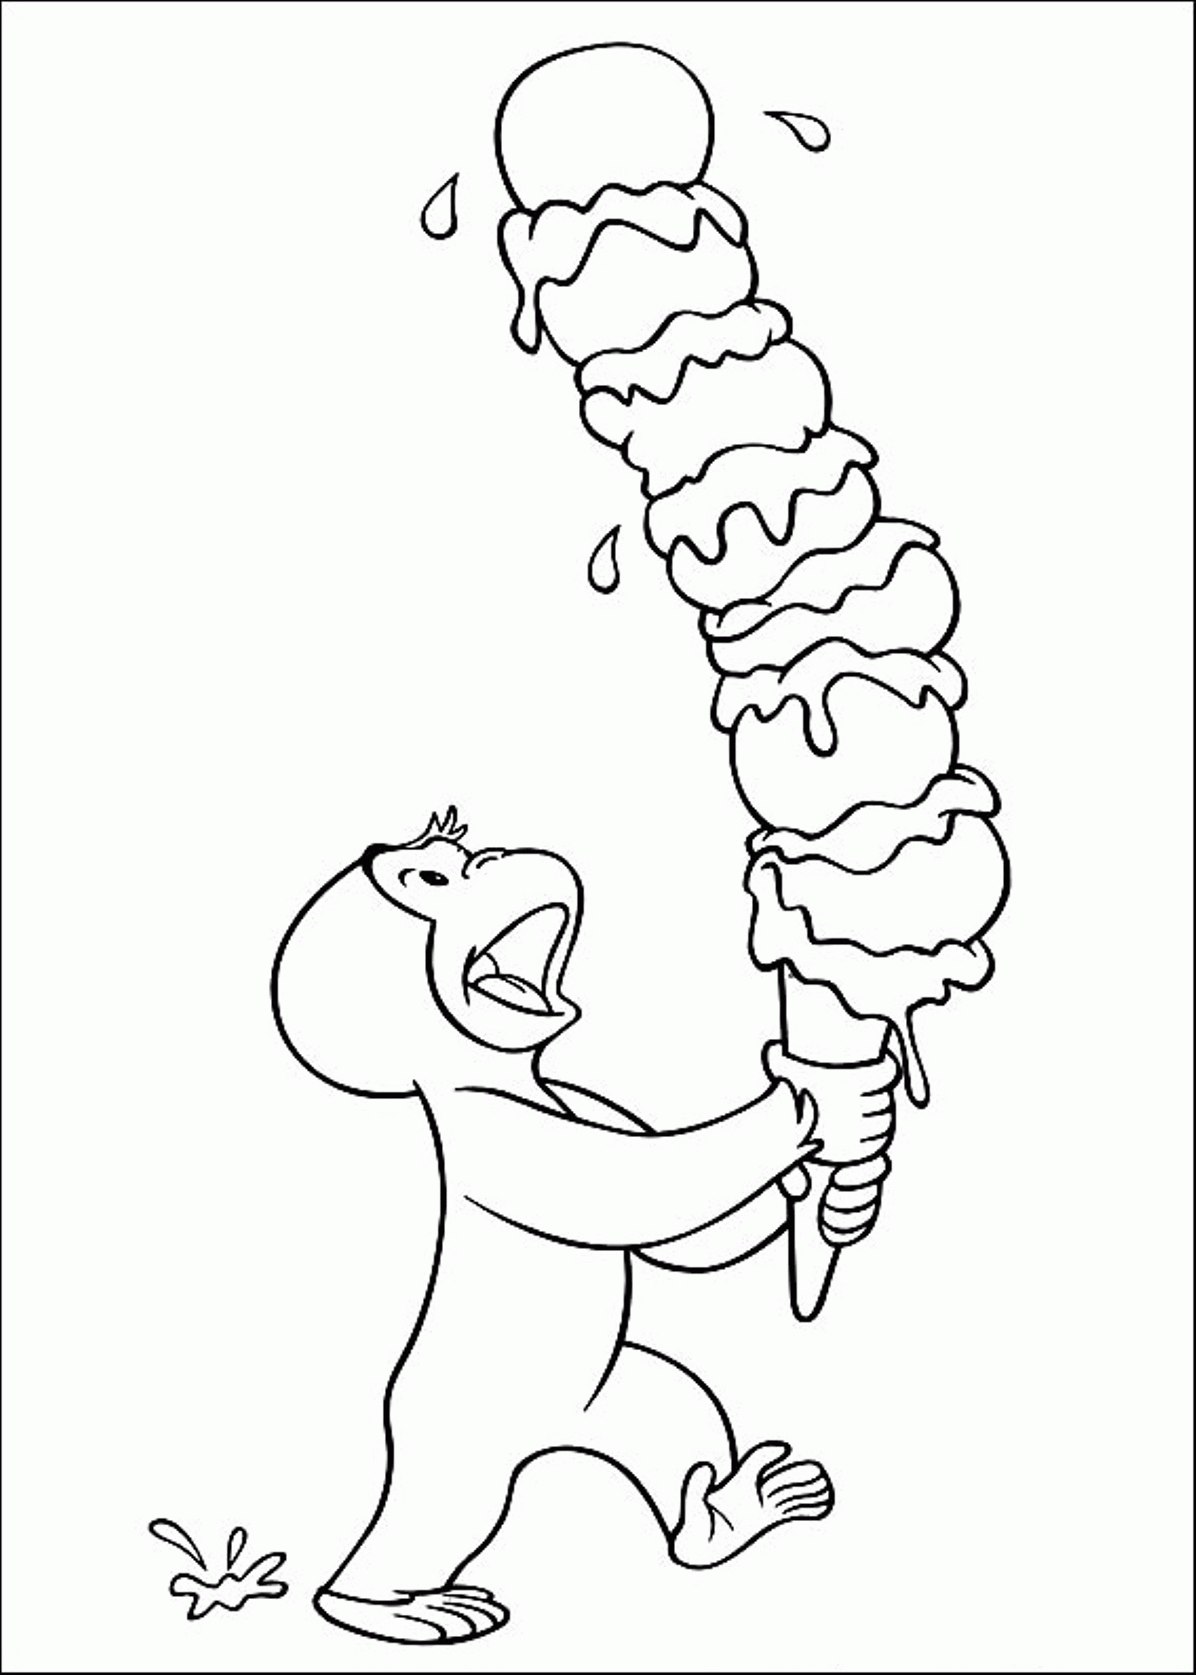 Printable Curious George Coloring Pages | Free Coloring Pages